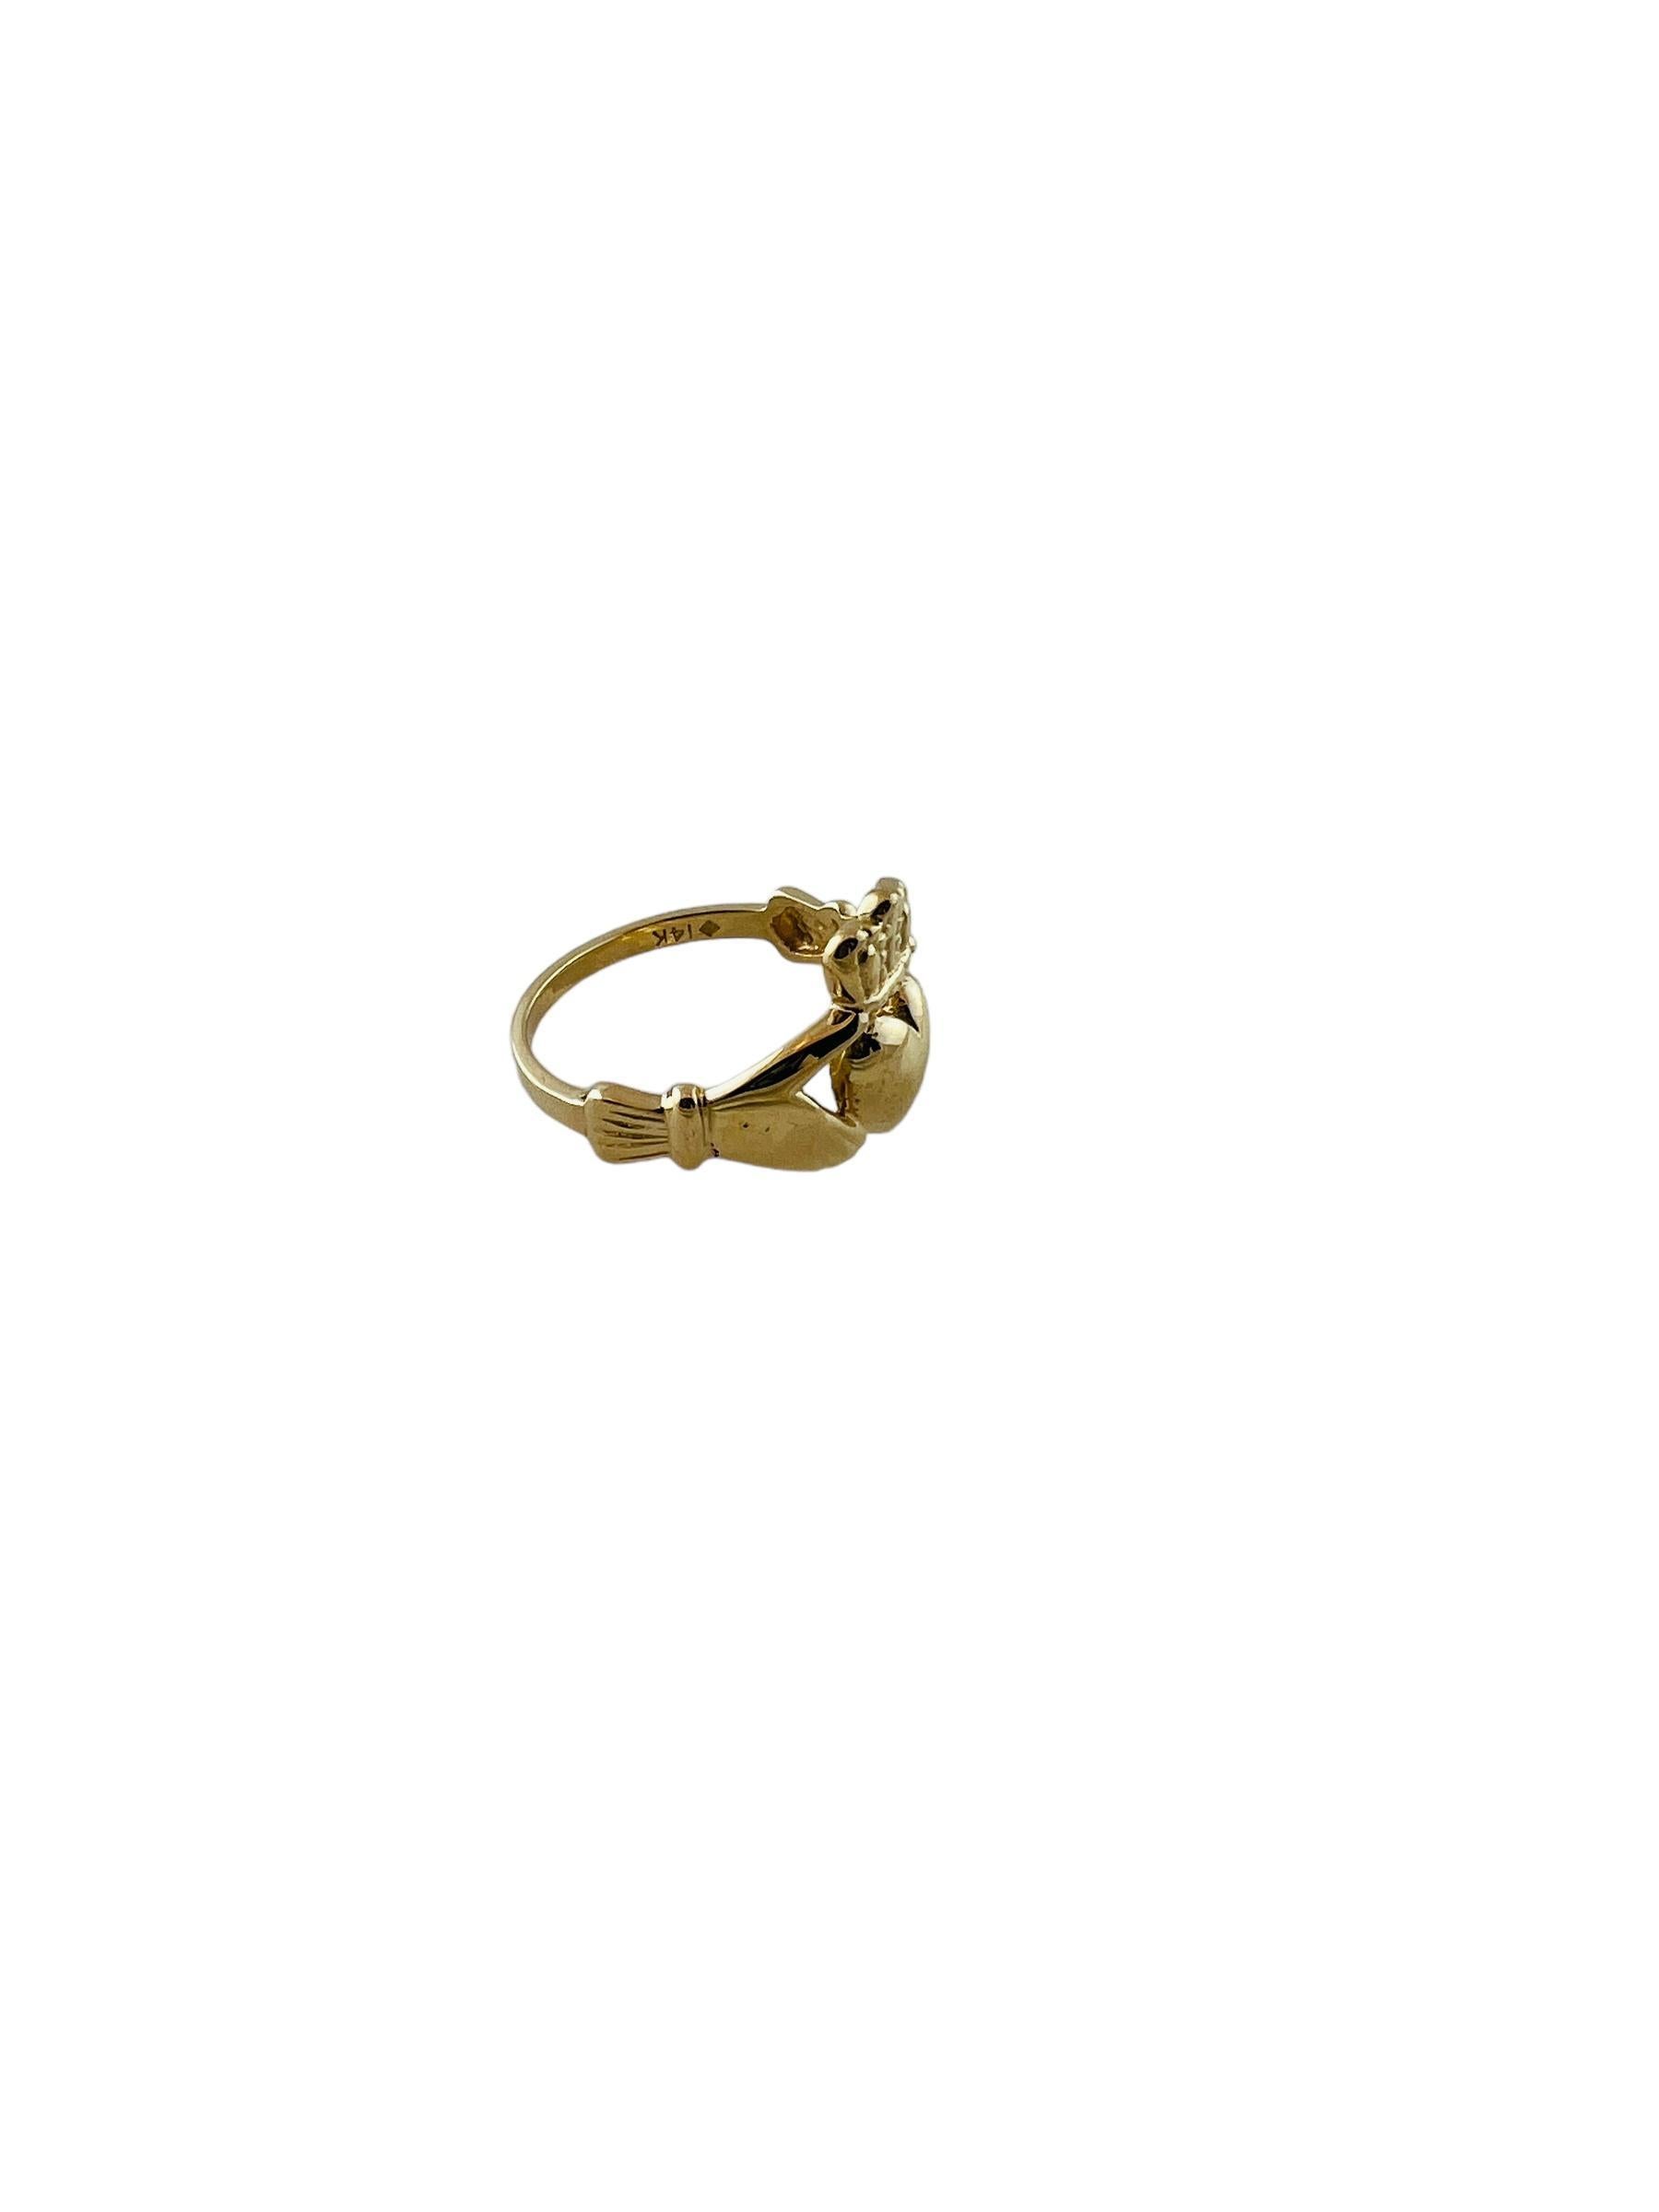 14K Yellow Gold Claddagh Ring

This beautiful ring is set in 14K yellow gold.

Ring is a size 6

Front of the ring is approx. 19.5 x 12.4 x 2.4 mm

Shank is approx. 1.7 mm

Stamped 14K

2.3 g / 1.4 dwt

Very good preowned condition. Just polished by